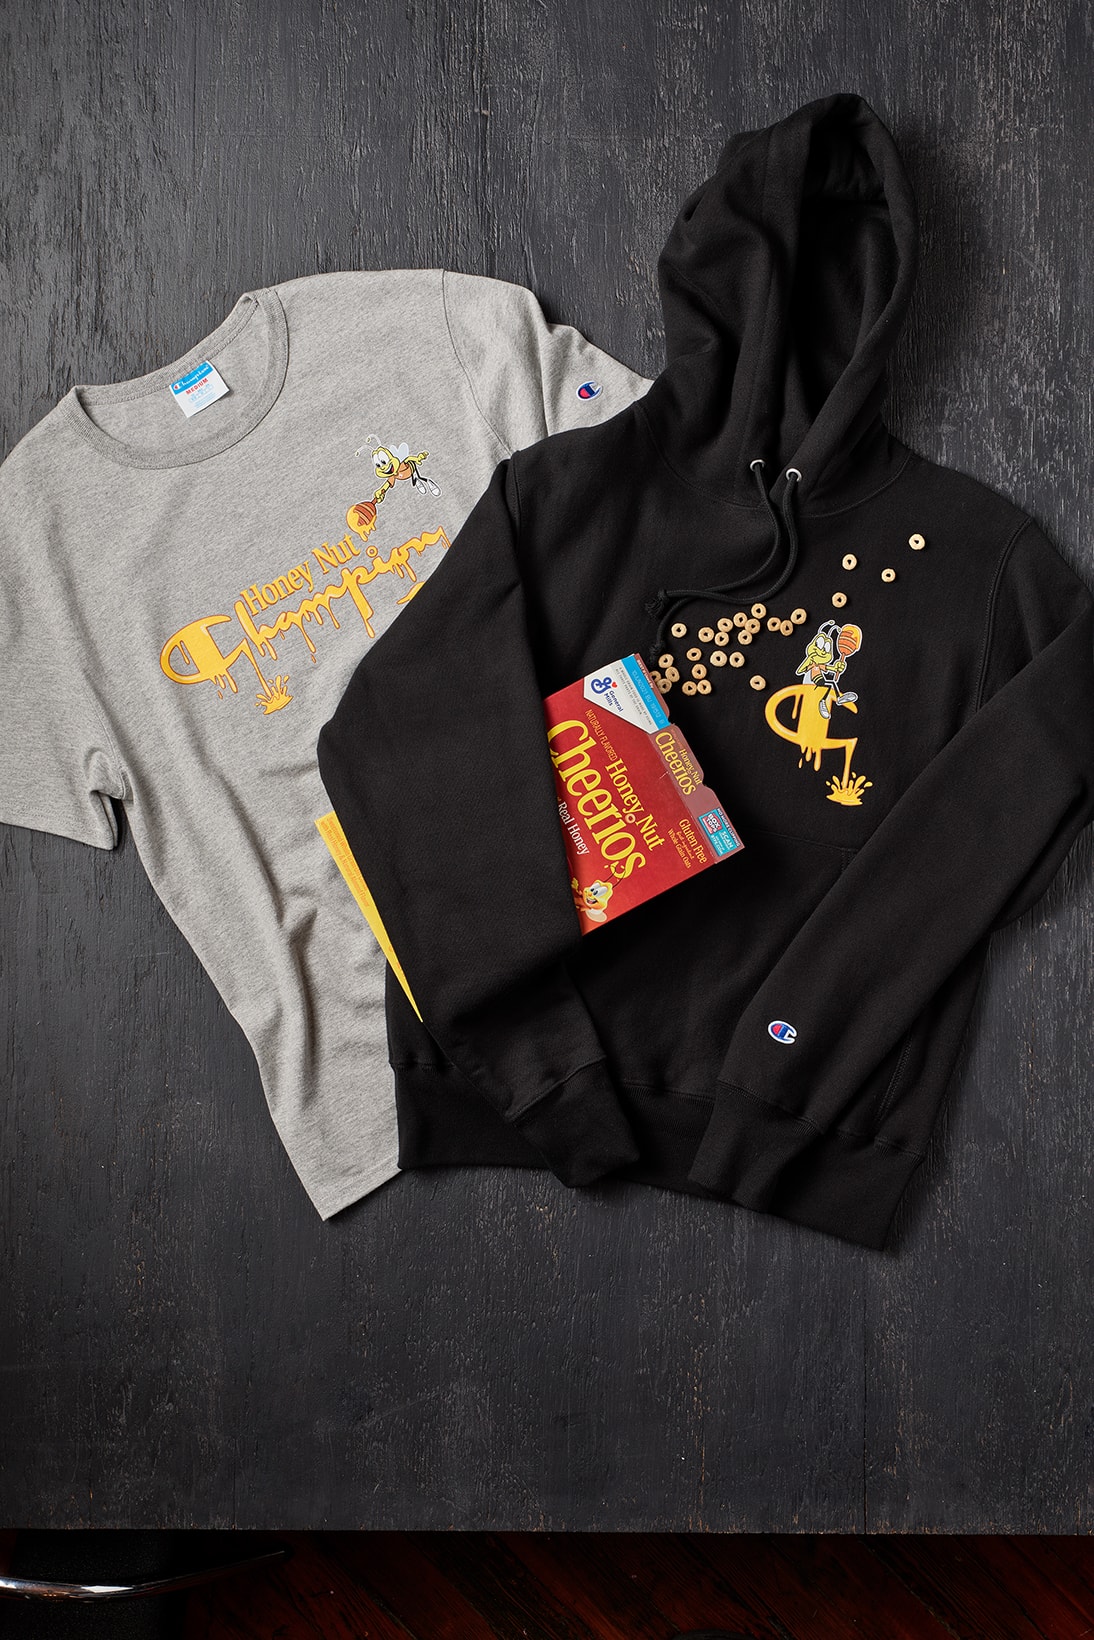 champion general mills collaboration cereal hoodies tees lucky charms cinnamon toast crunch red gray